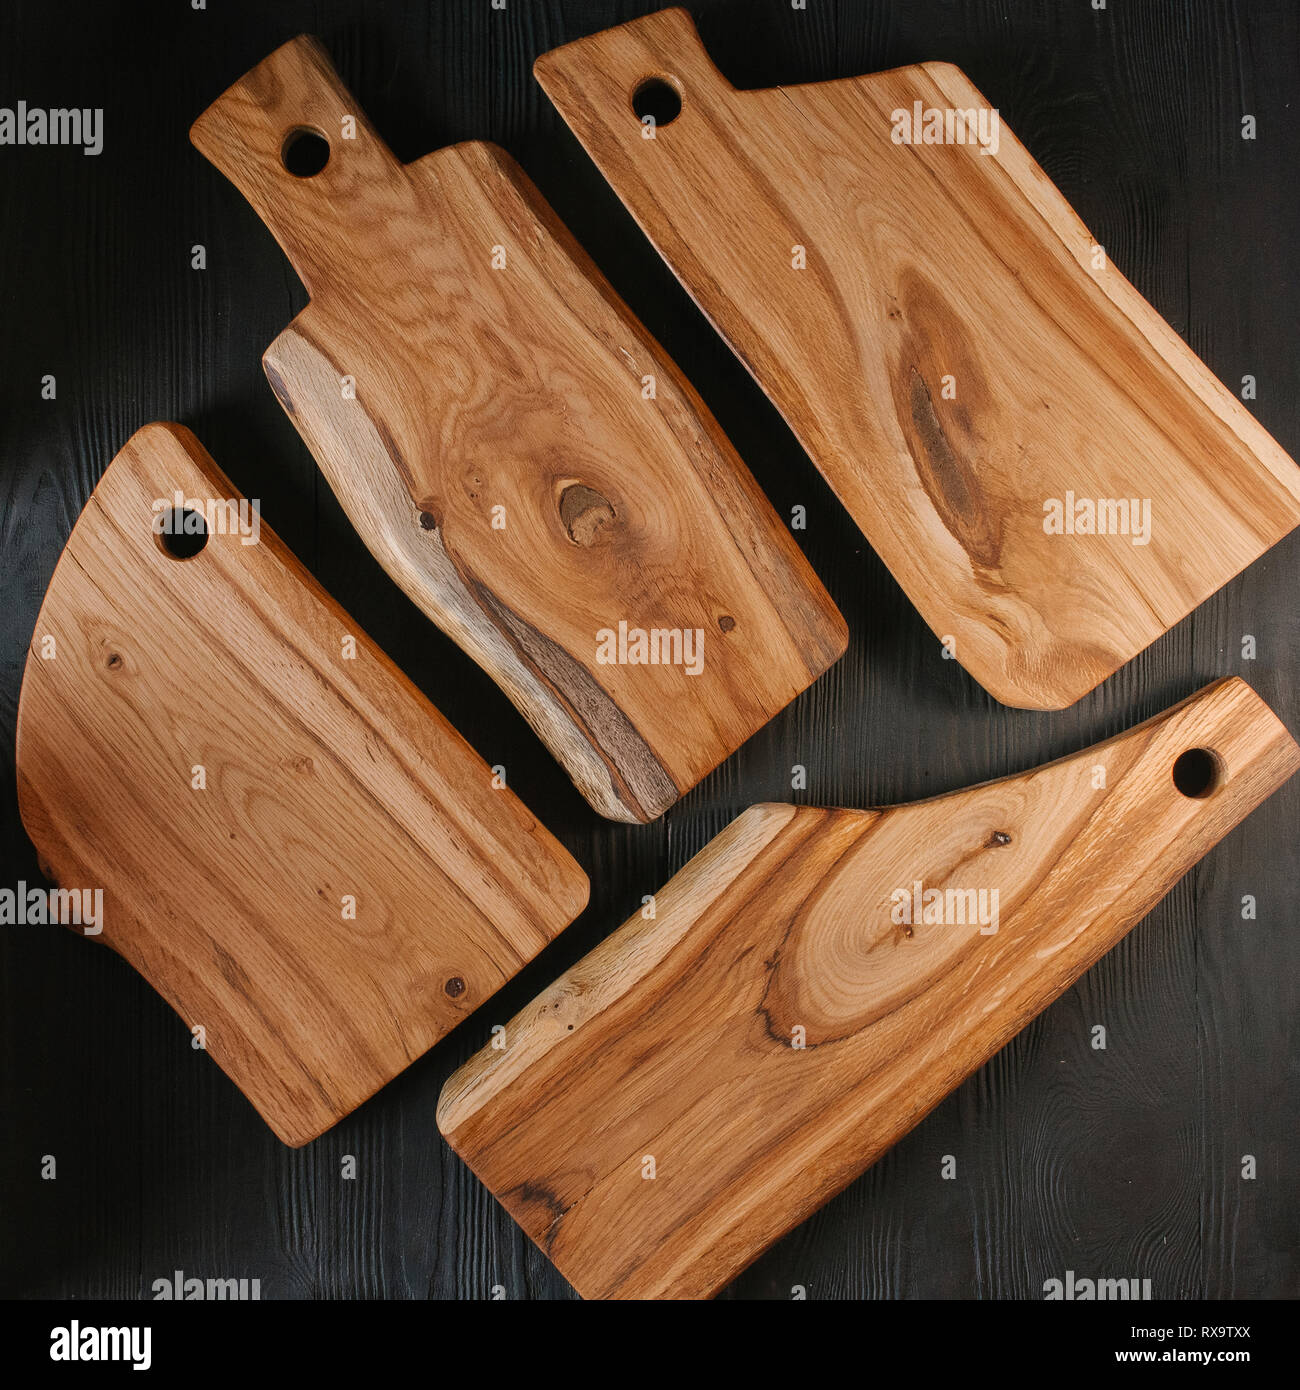 https://c8.alamy.com/comp/RX9TXX/overhead-view-of-various-chopping-boards-on-wooden-table-RX9TXX.jpg